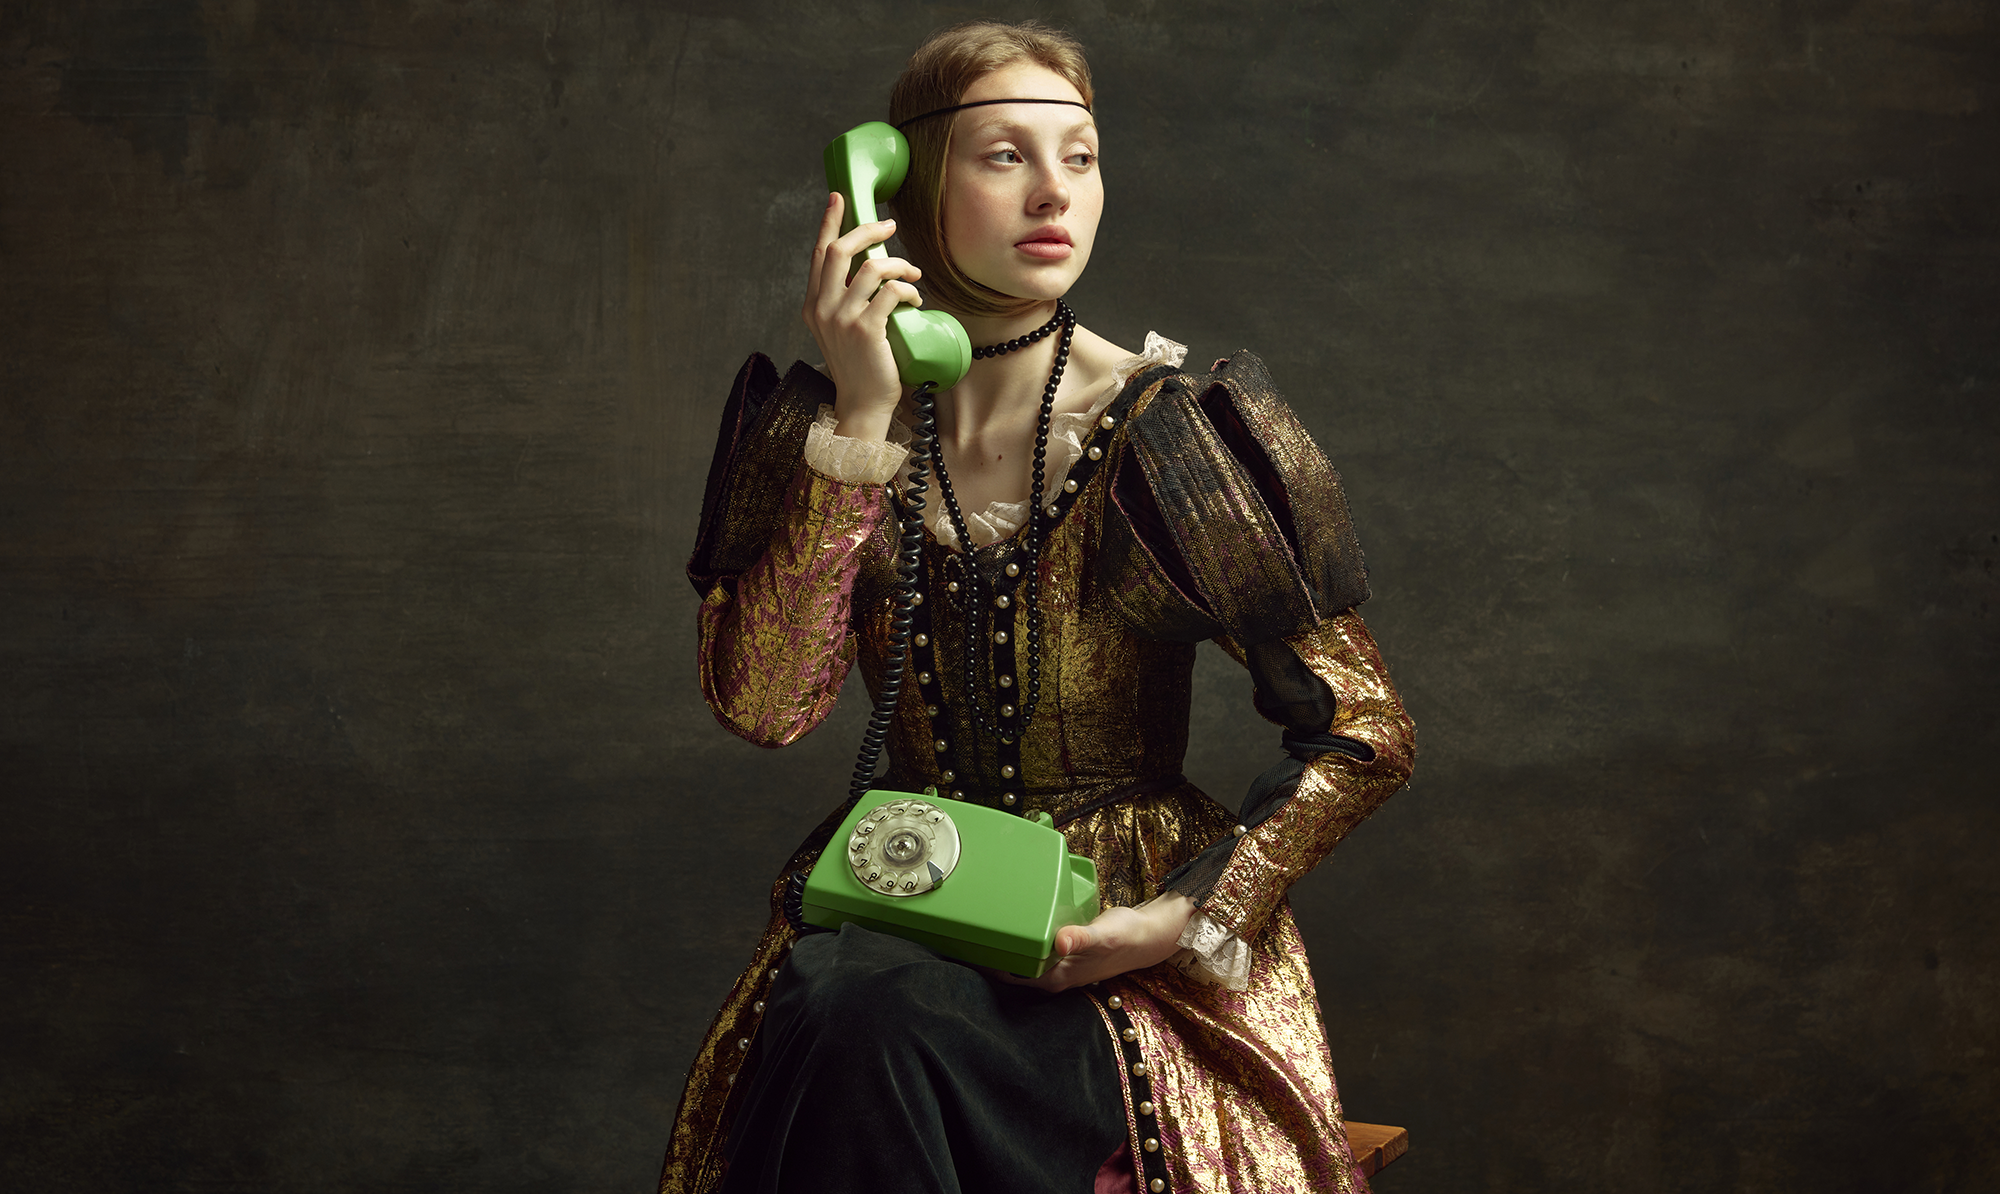 Medieval woman on a telephone